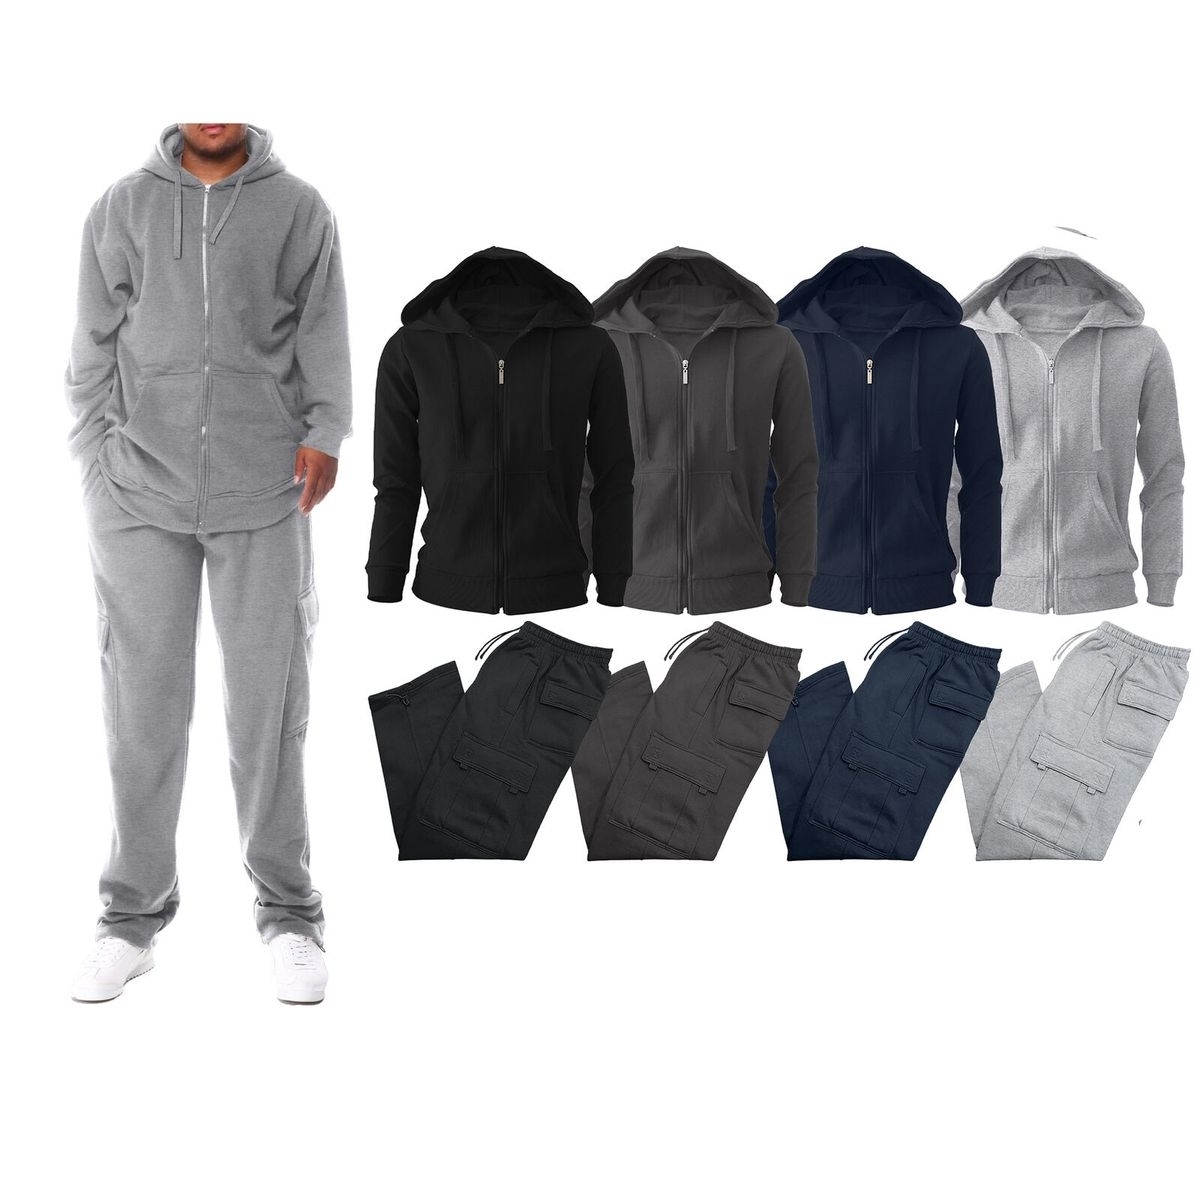 Men's Big & Tall Winter Warm Athletic Active Cozy Fleece Lined Multi-Pocket Full Zip Up Cargo Tracksuit - Charcoal, Large